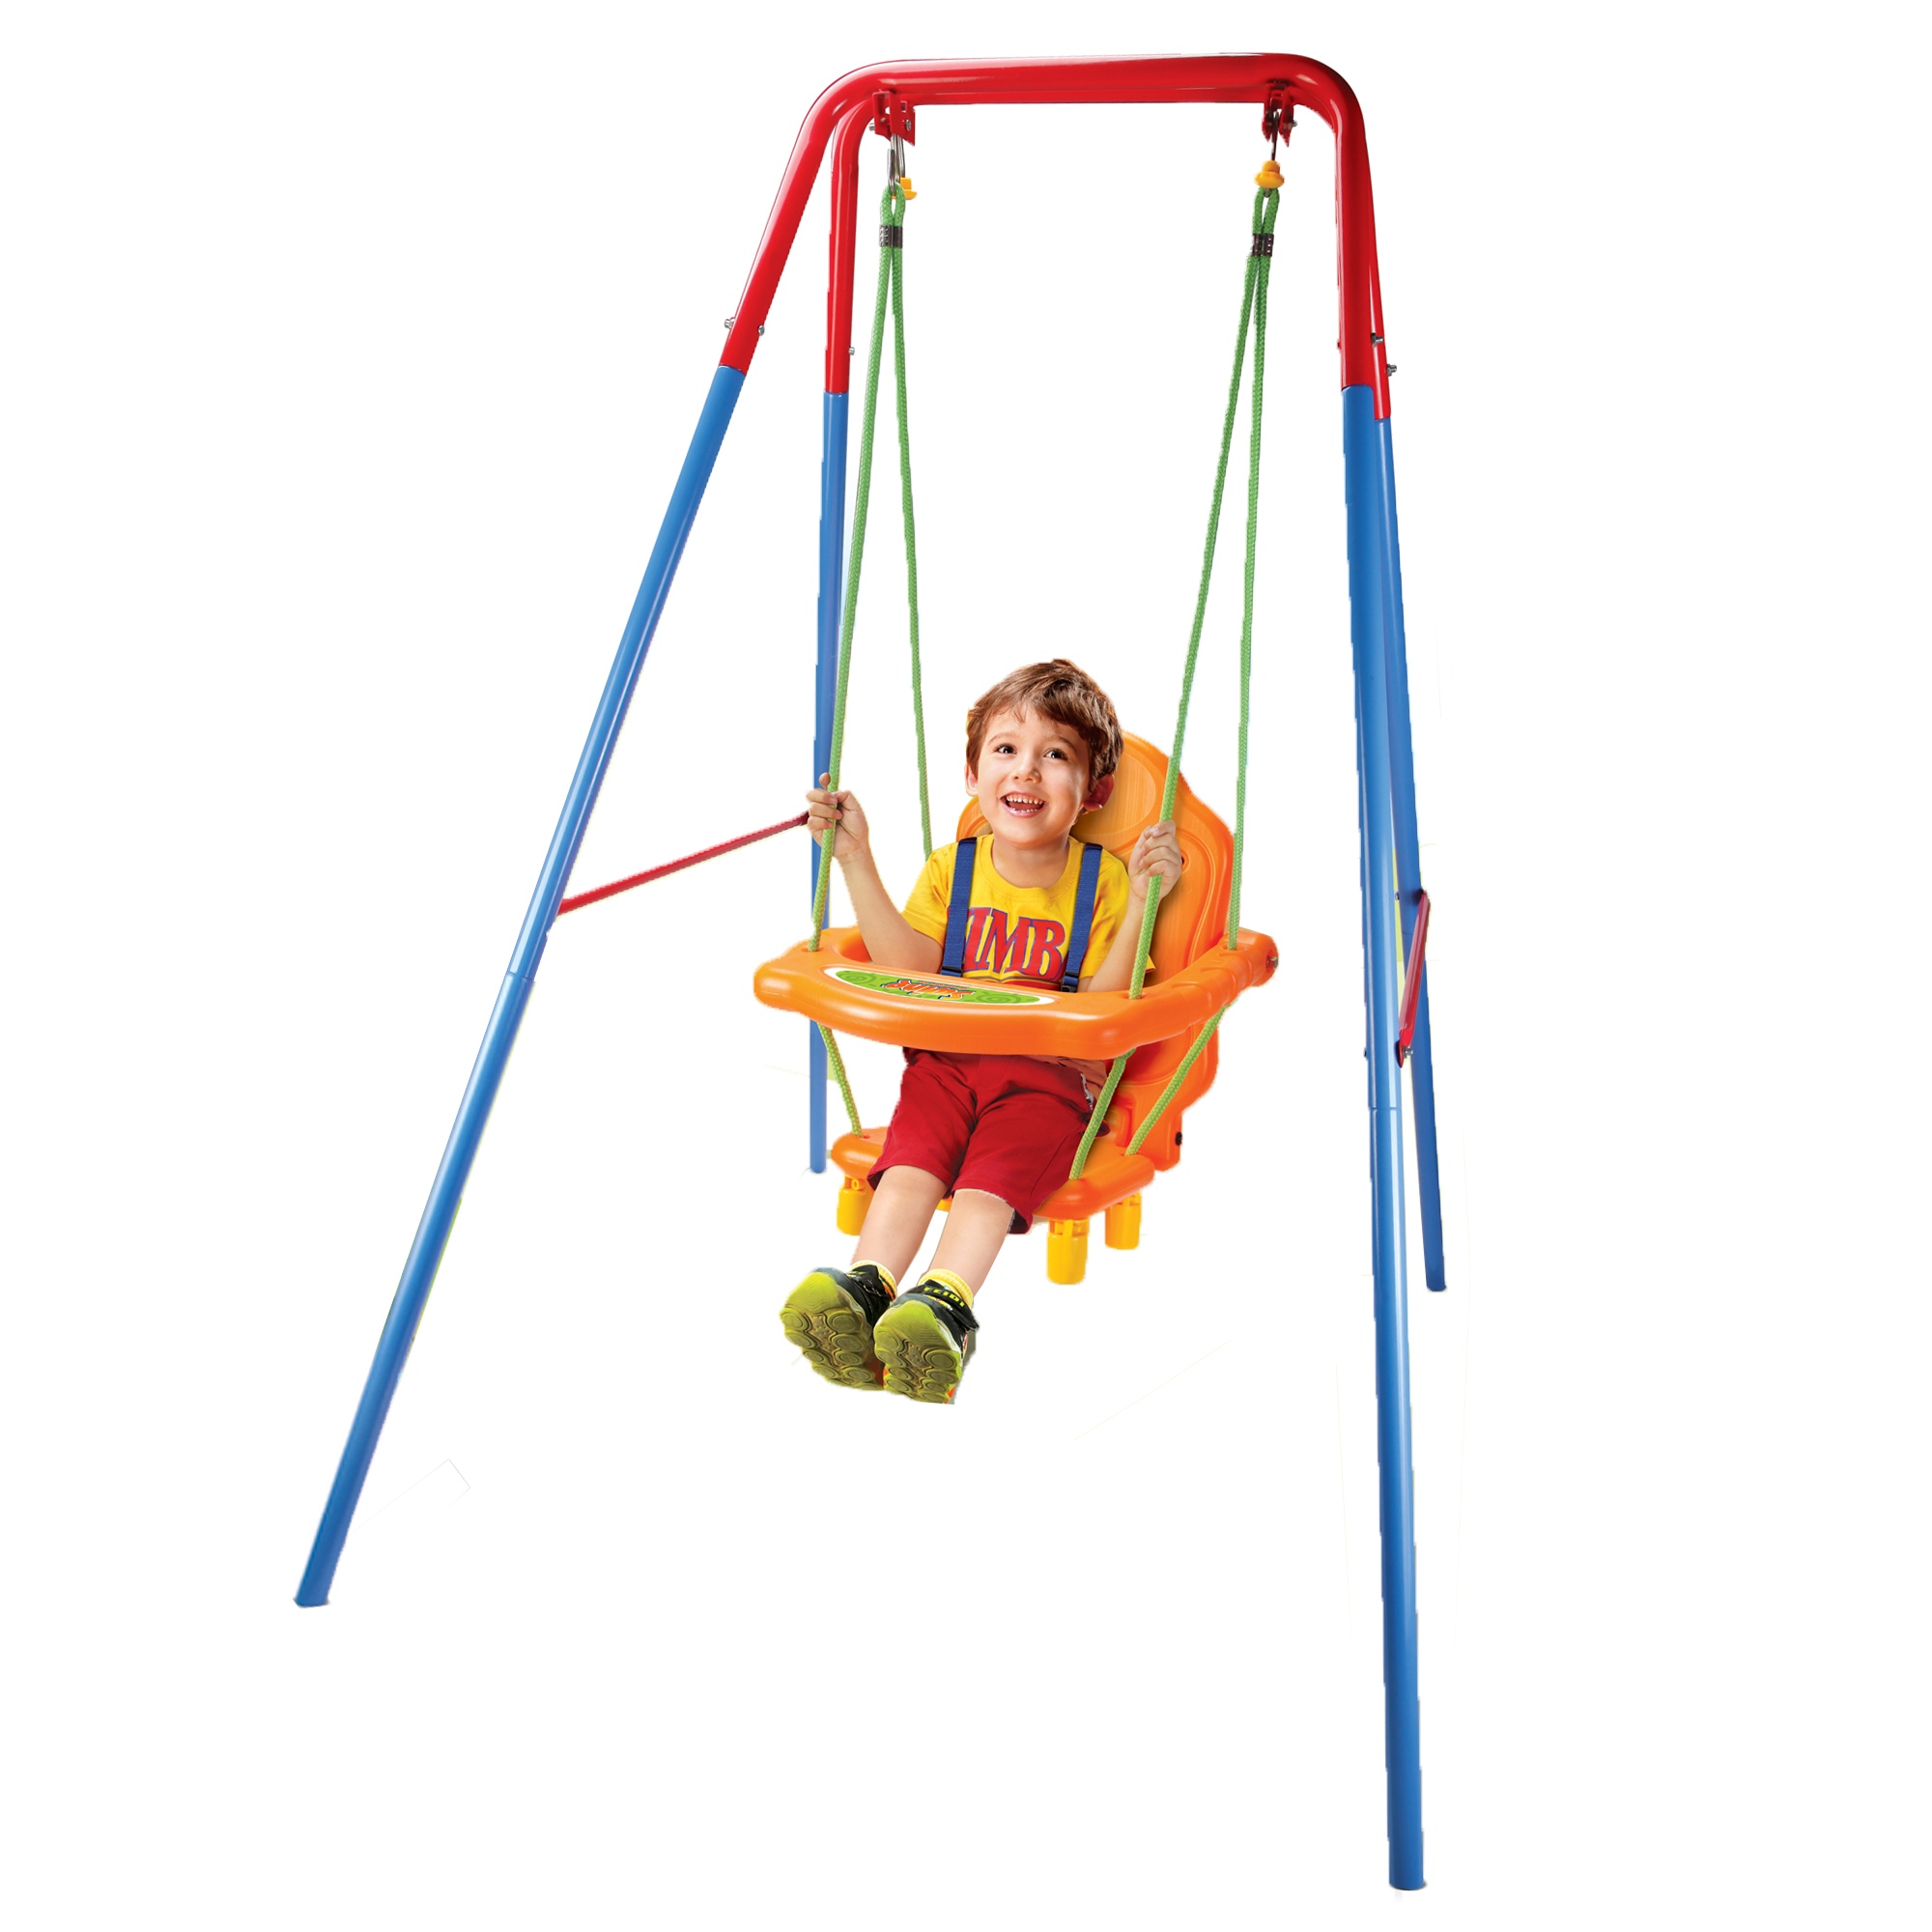 Toddler Baby Swing With Safety Seat Kids Outdoor Garden Play Toy Metal ...